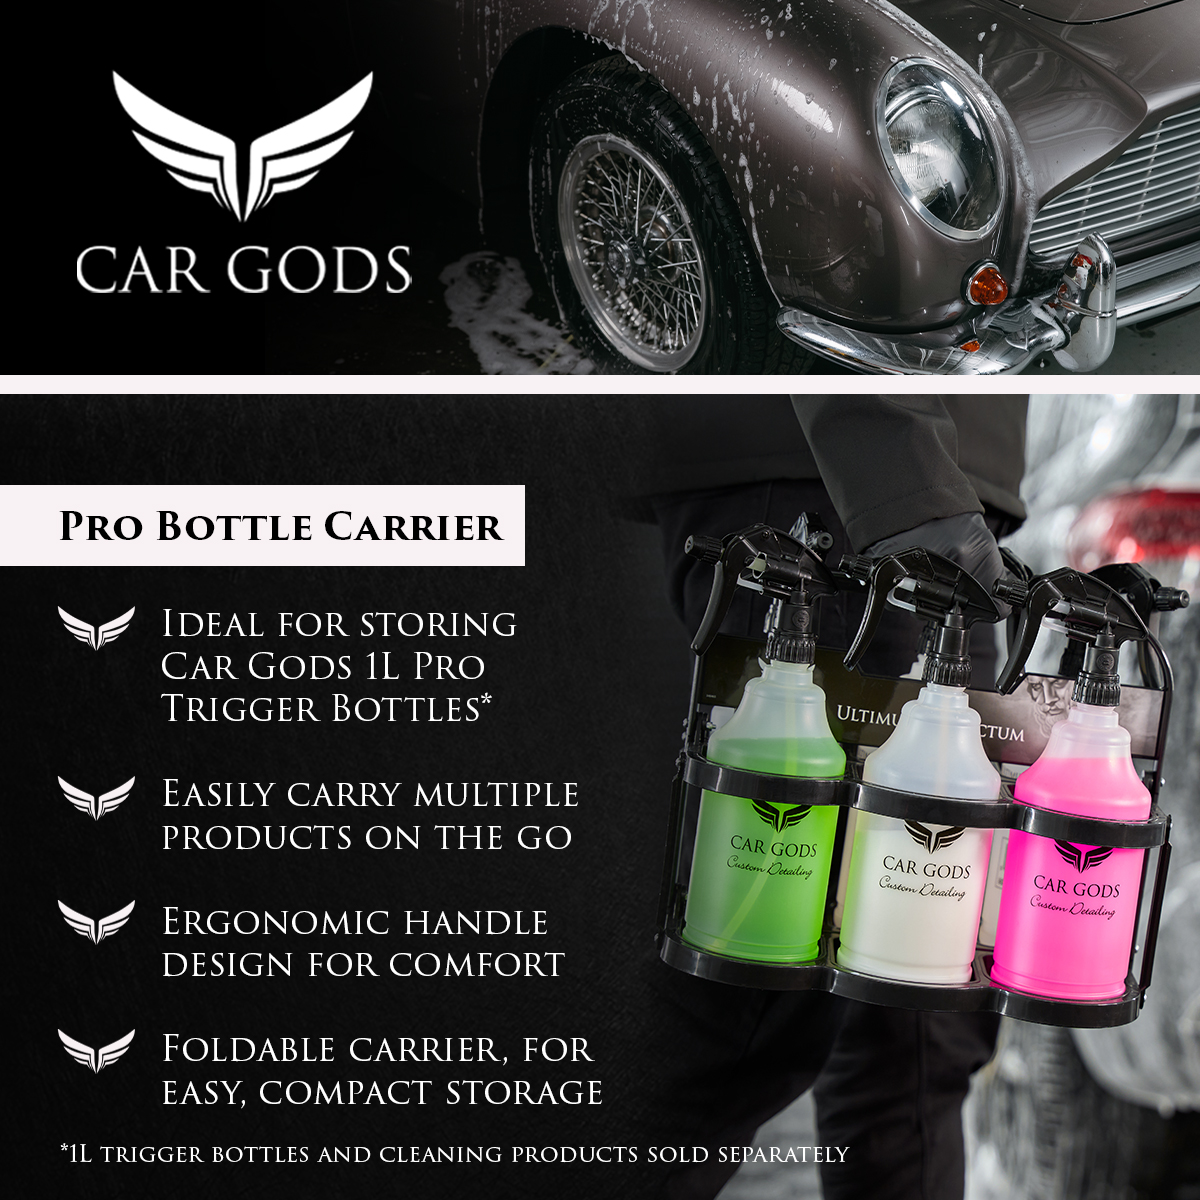 Enhance your detailing experience with Car Gods Pro Bottle Carrier. Store up to 6 1L Car Gods Pro Trigger Bottles (sold separately), and easily carry them around with the ergonomically designed handle. The foldable, ergonomic carrier boasts a compact design for easy, convenient, storage. The days of struggling with bulky bottles and multiple trips are over! Elevate your car care experience with Car Gods.